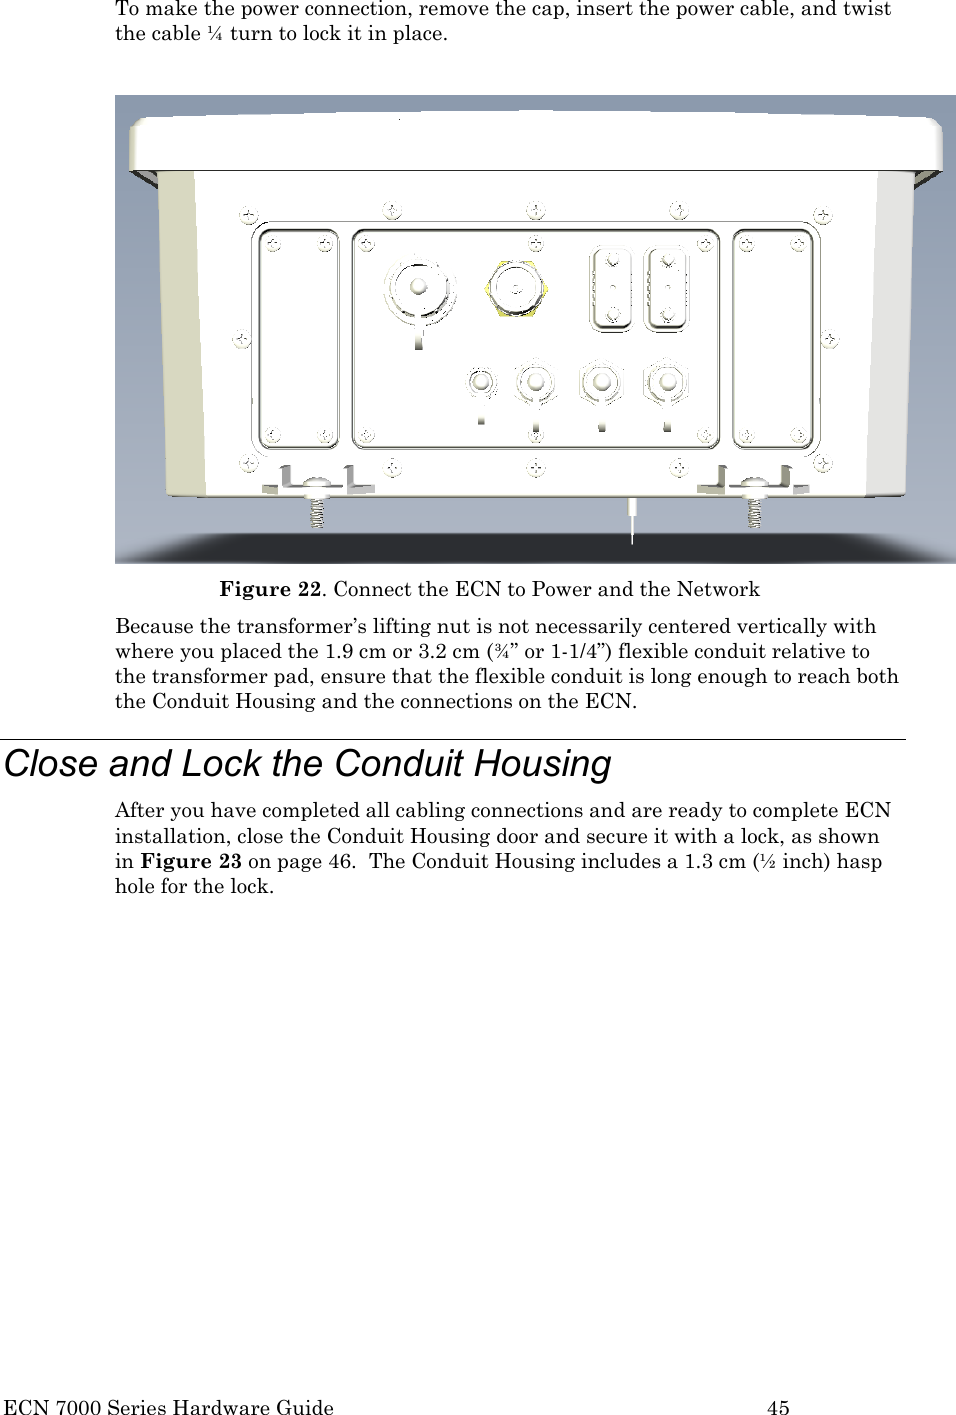  ECN 7000 Series Hardware Guide        45 To make the power connection, remove the cap, insert the power cable, and twist the cable ¼ turn to lock it in place.   Figure 22. Connect the ECN to Power and the Network Because the transformer’s lifting nut is not necessarily centered vertically with where you placed the 1.9 cm or 3.2 cm (¾” or 1-1/4”) flexible conduit relative to the transformer pad, ensure that the flexible conduit is long enough to reach both the Conduit Housing and the connections on the ECN. Close and Lock the Conduit Housing After you have completed all cabling connections and are ready to complete ECN installation, close the Conduit Housing door and secure it with a lock, as shown in Figure 23 on page 46.  The Conduit Housing includes a 1.3 cm (½ inch) hasp hole for the lock.  